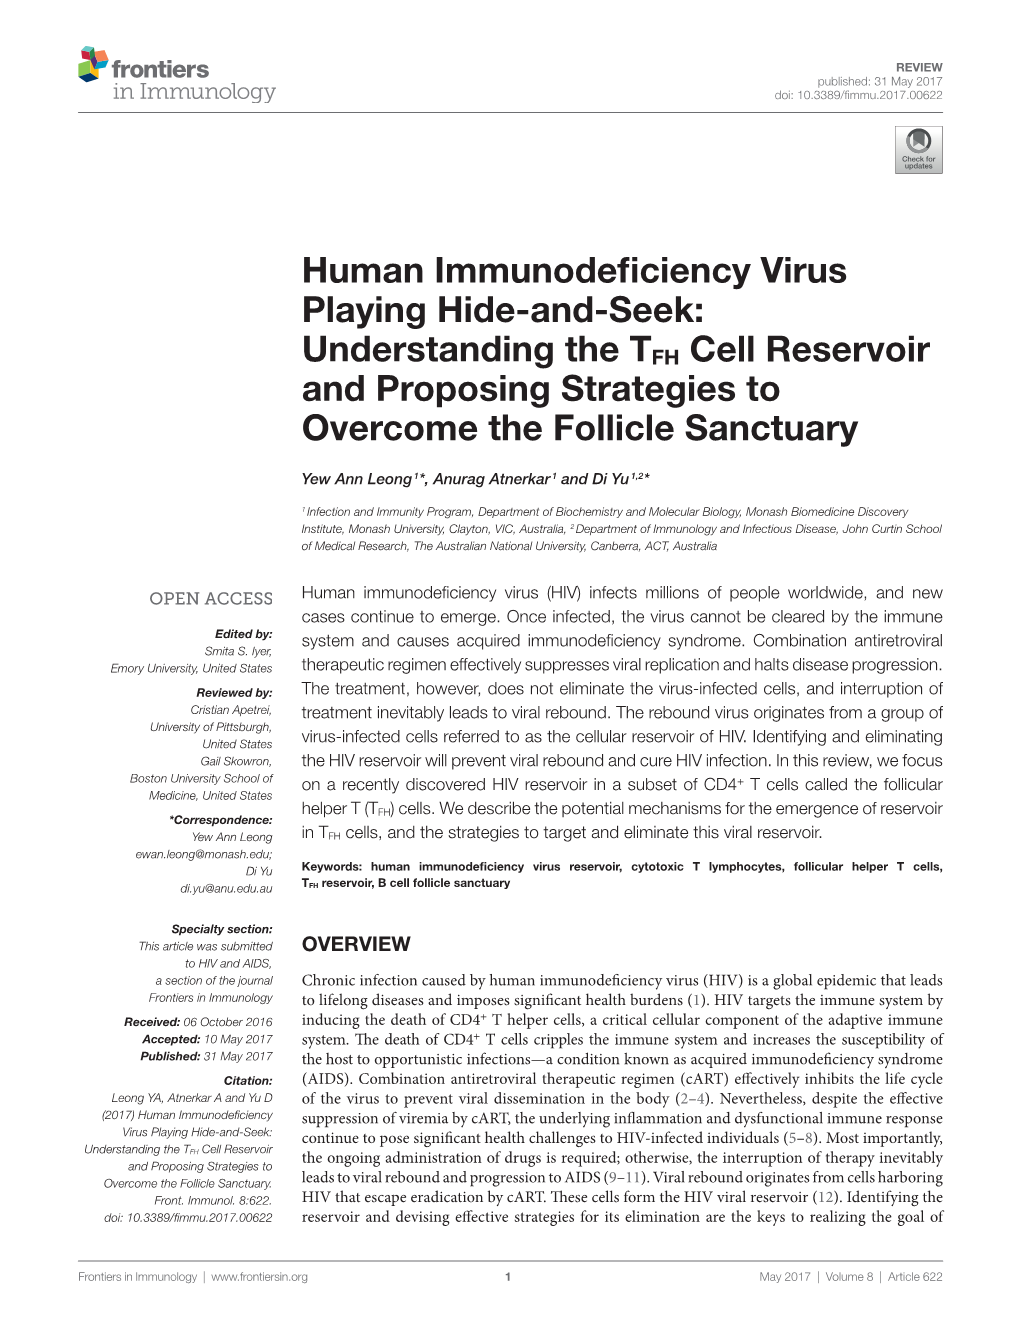 Human Immunodeficiency Virus Playing Hide-And-Seek: Understanding the TFH Cell Reservoir and Proposing Strategies to Overcome the Follicle Sanctuary